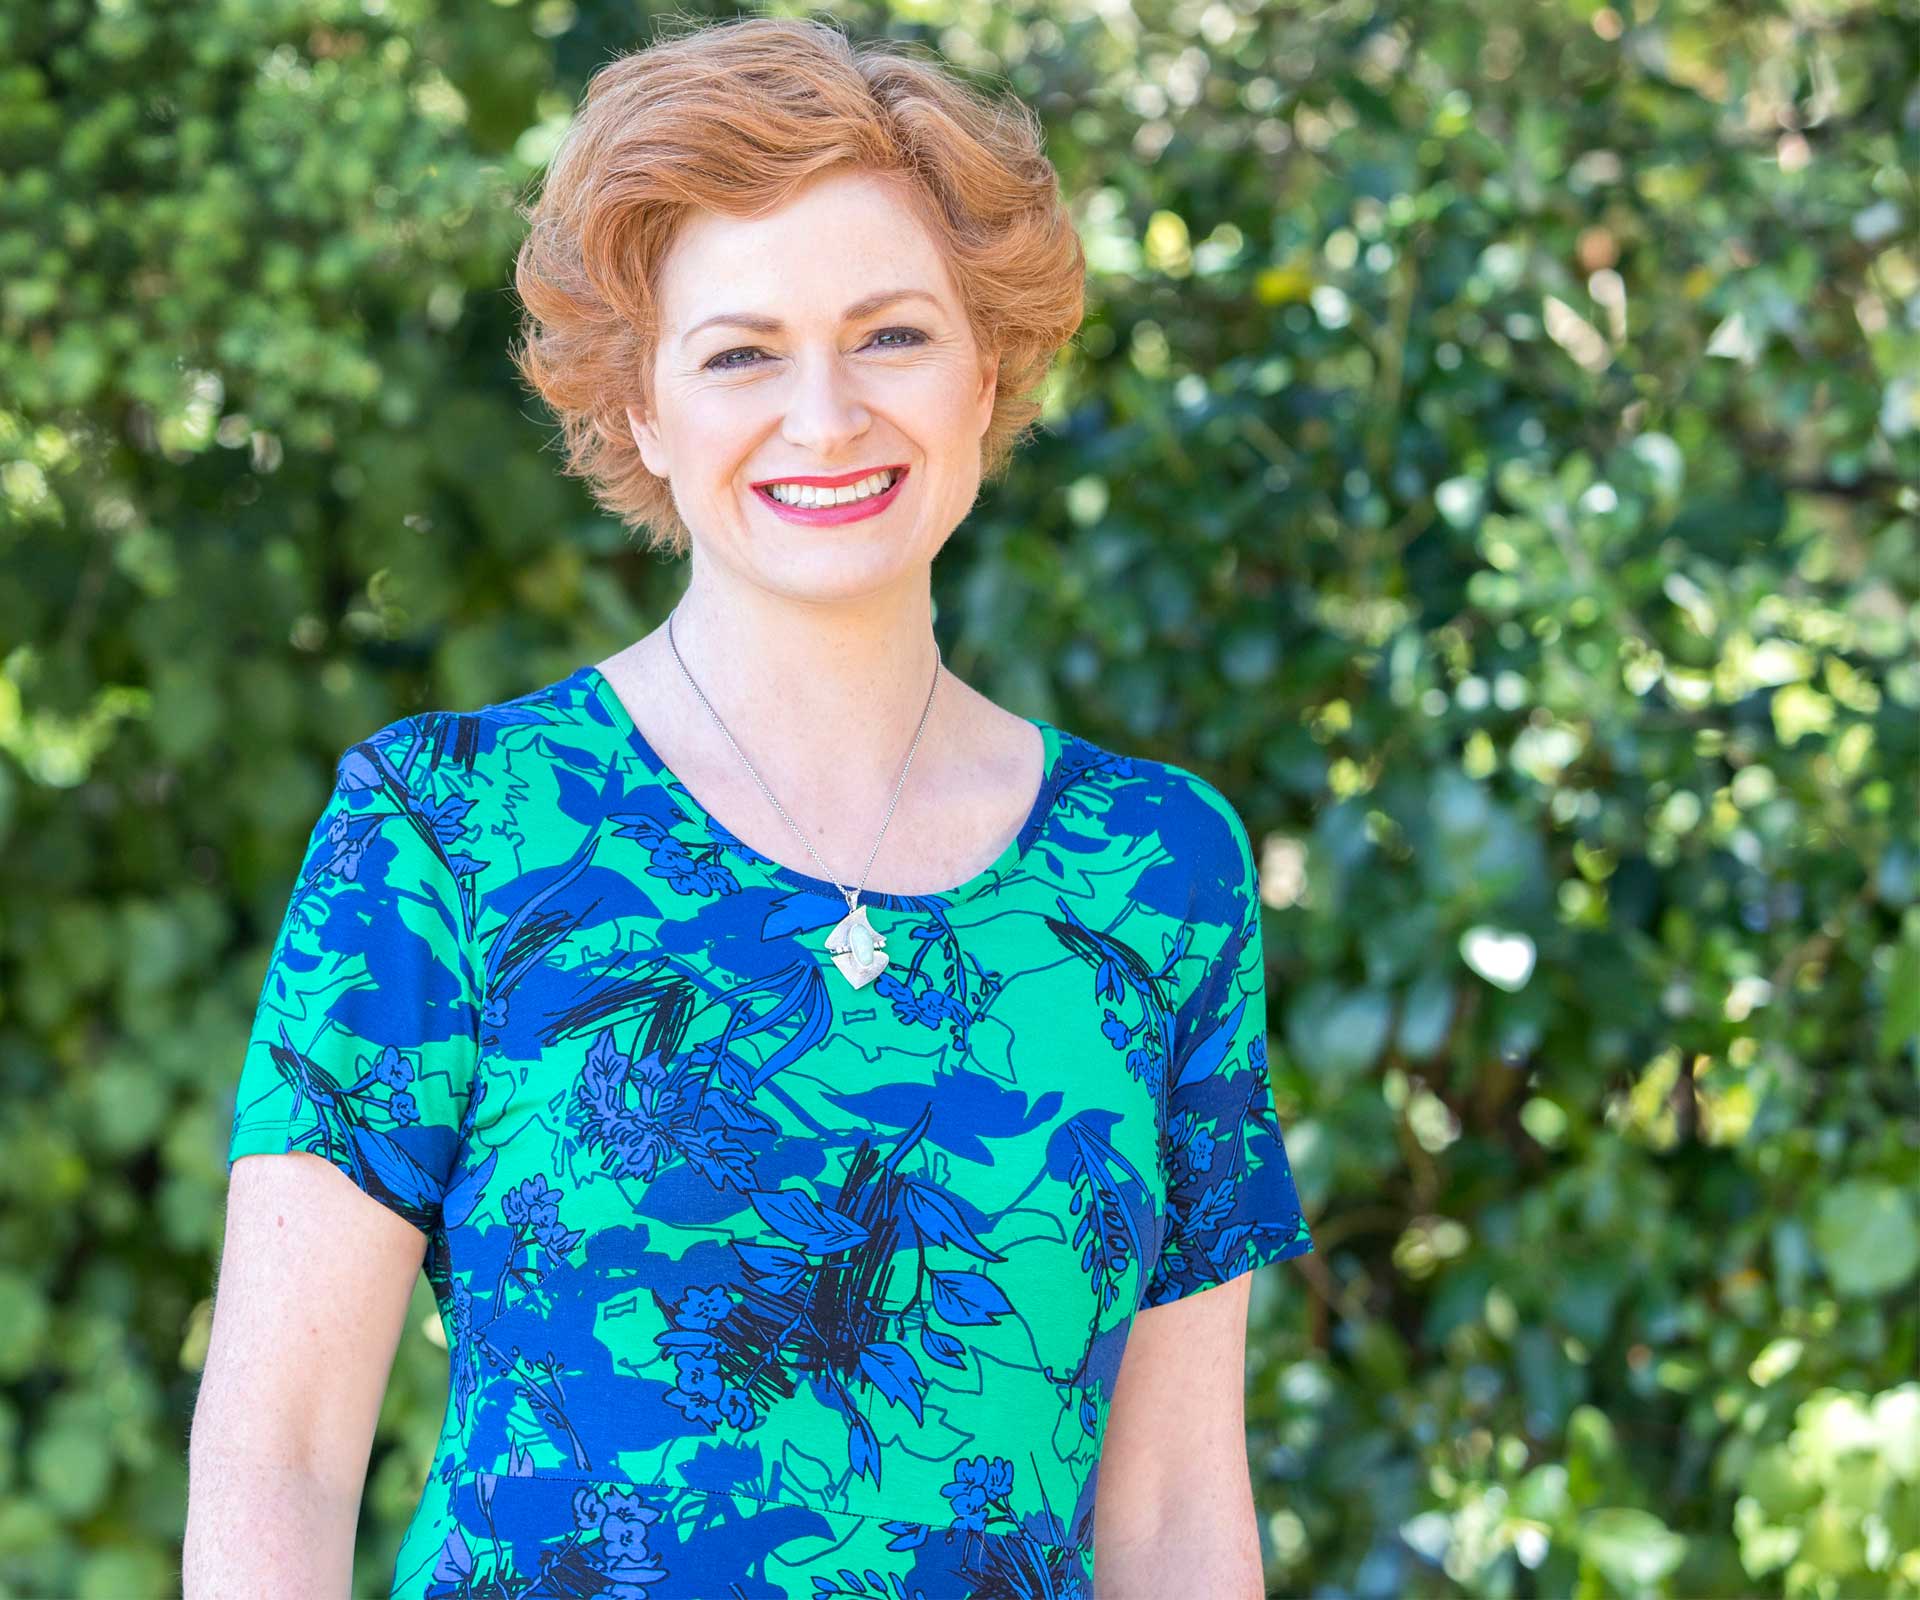 Radio NZ broadcaster Susie Ferguson on how agonising endometriosis was for her and the surgery that changed everything